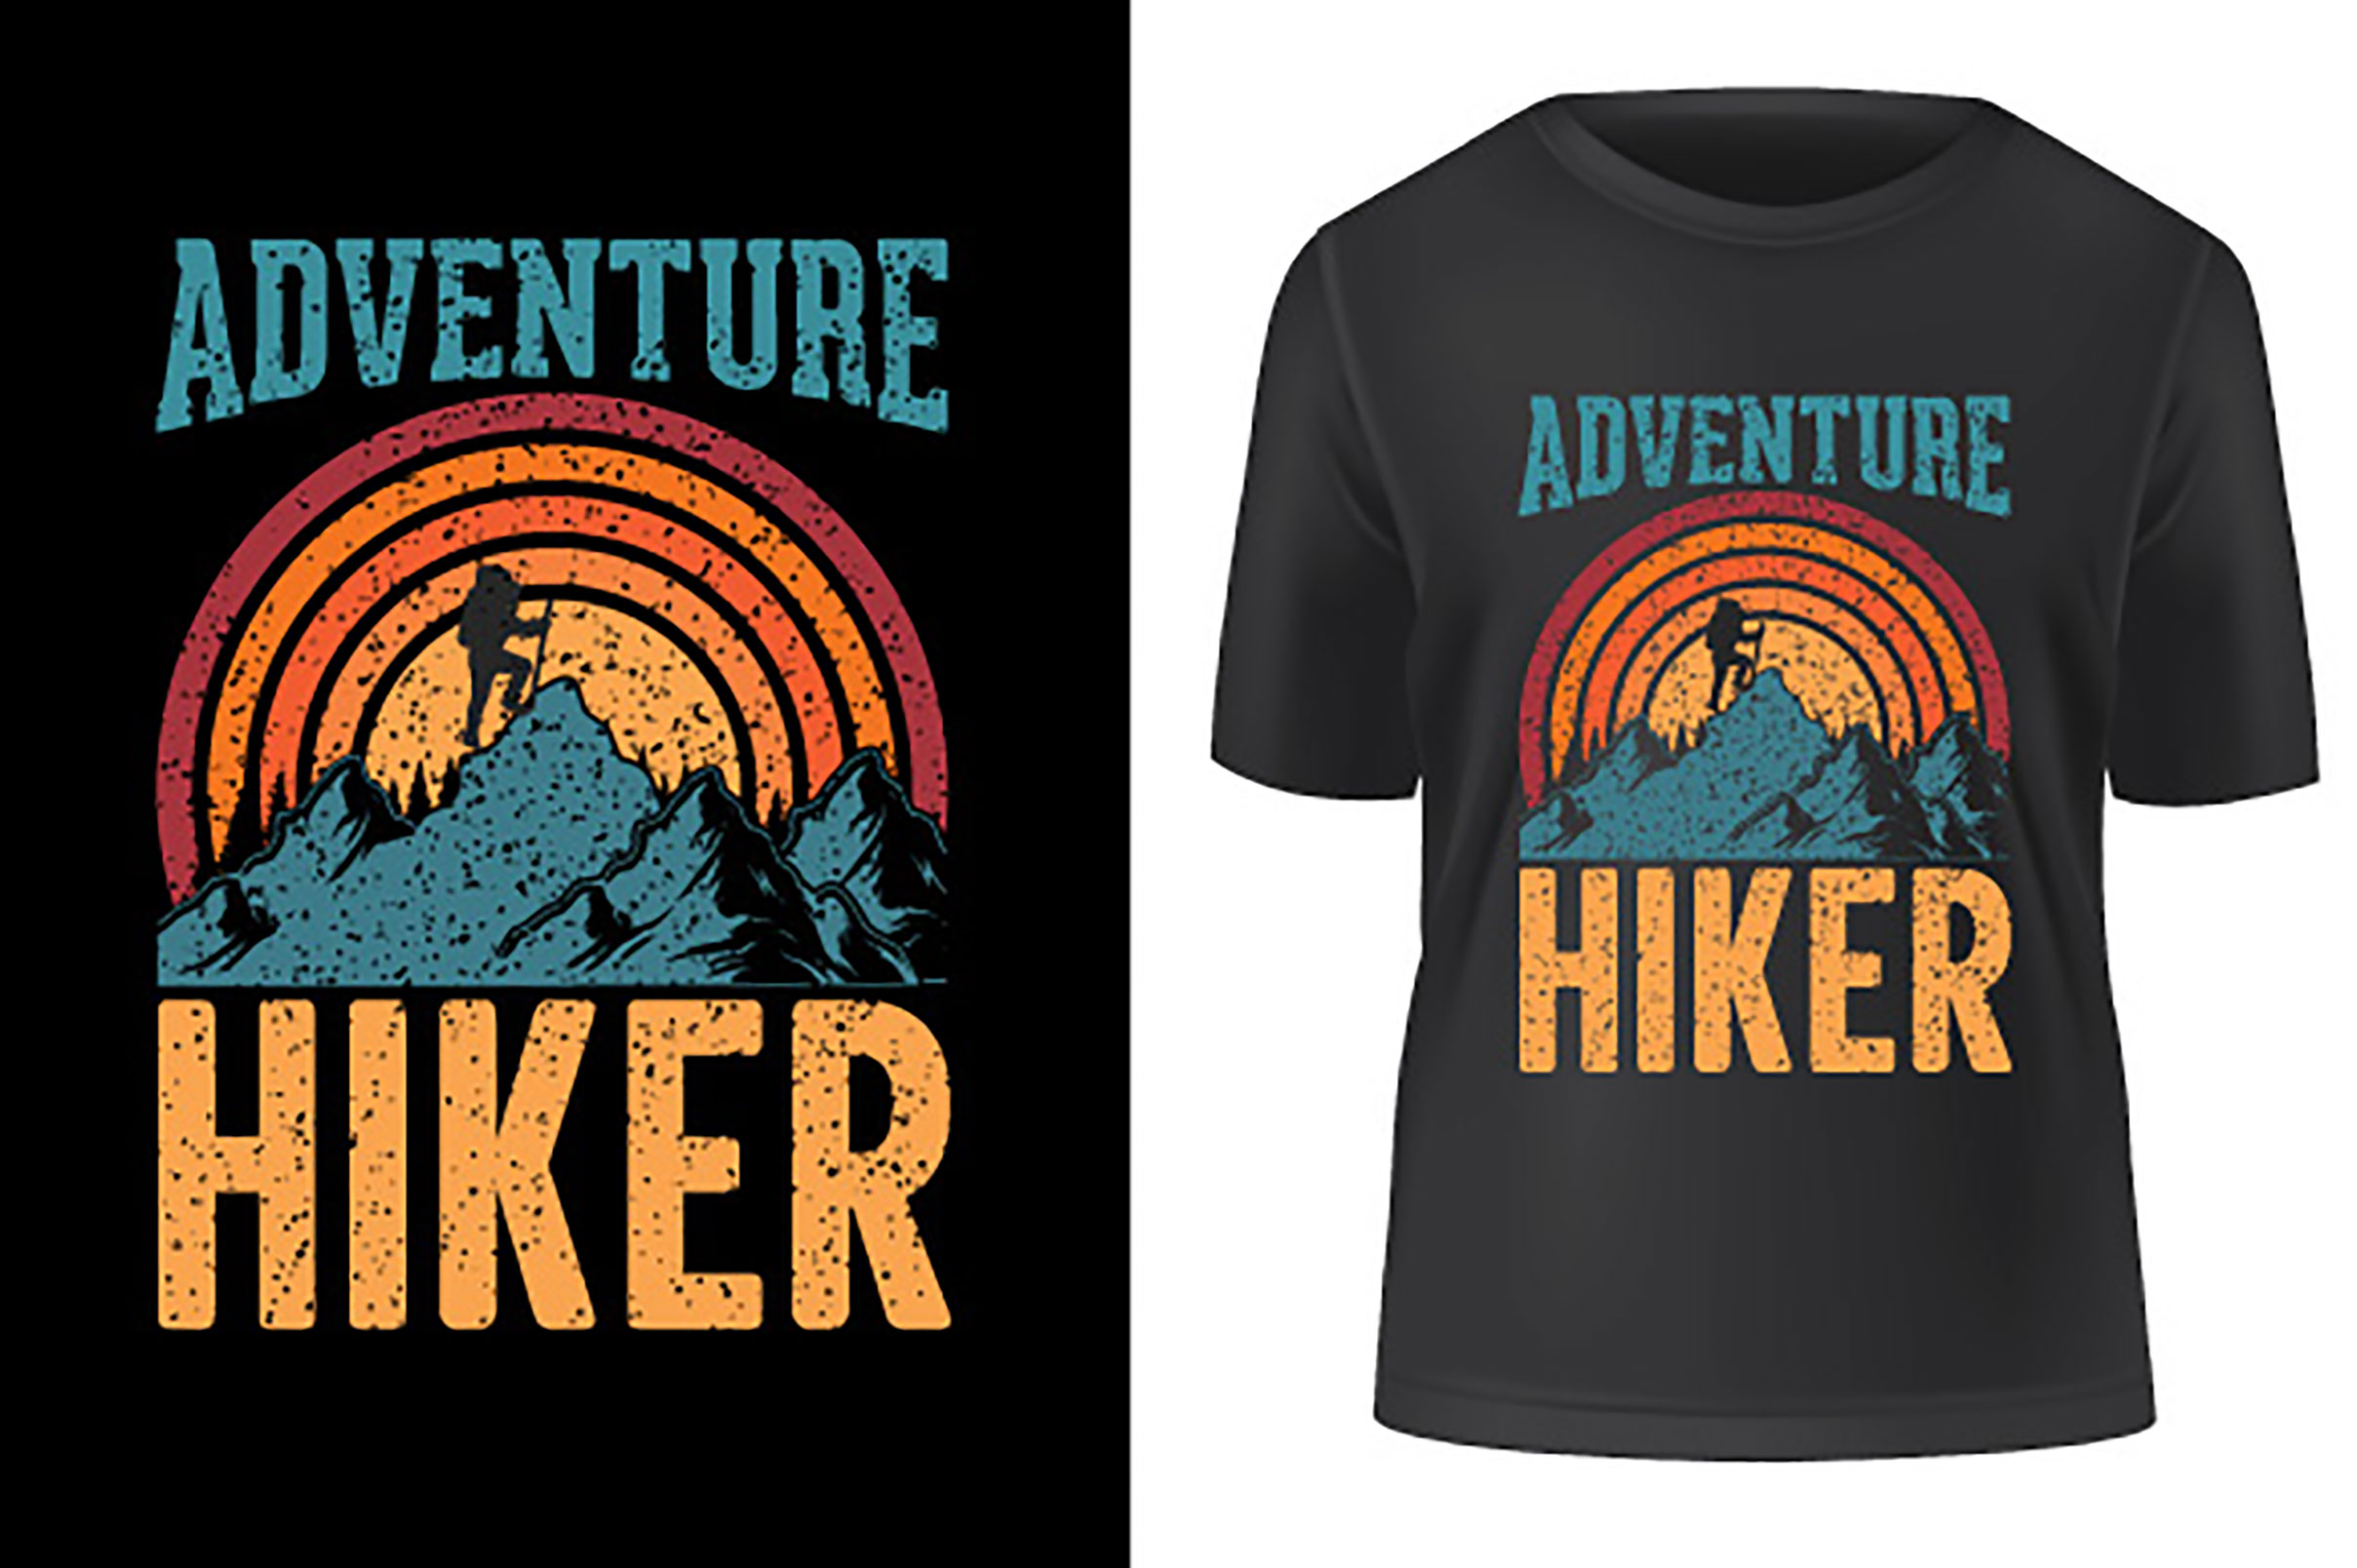 Adventure hiking design like t-shirt Lovers cover image.